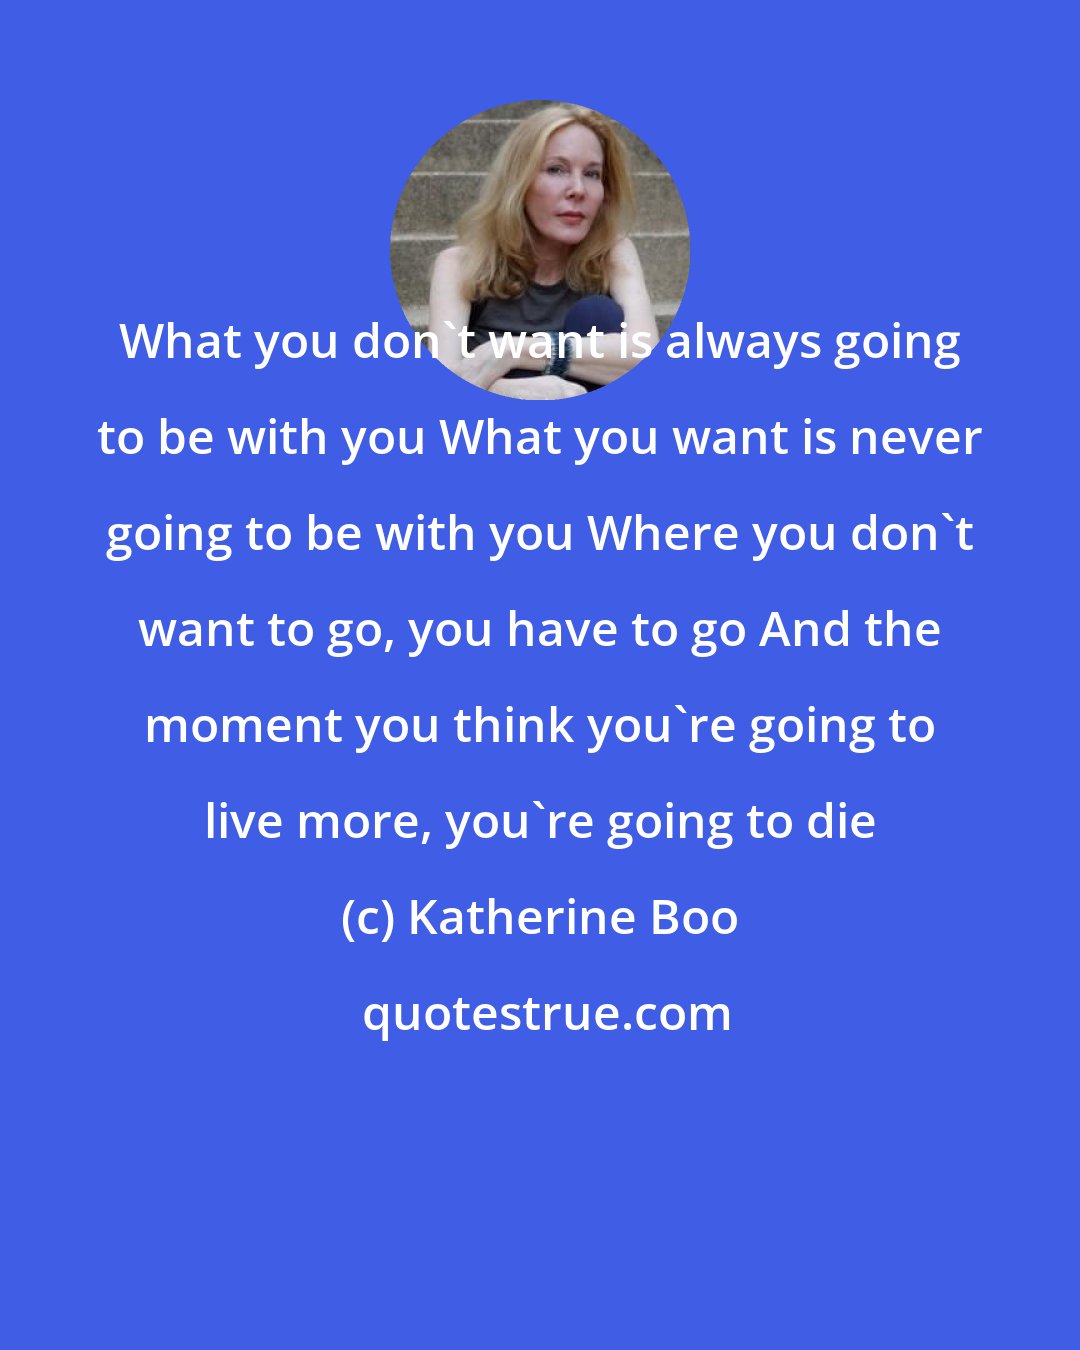 Katherine Boo: What you don't want is always going to be with you What you want is never going to be with you Where you don't want to go, you have to go And the moment you think you're going to live more, you're going to die